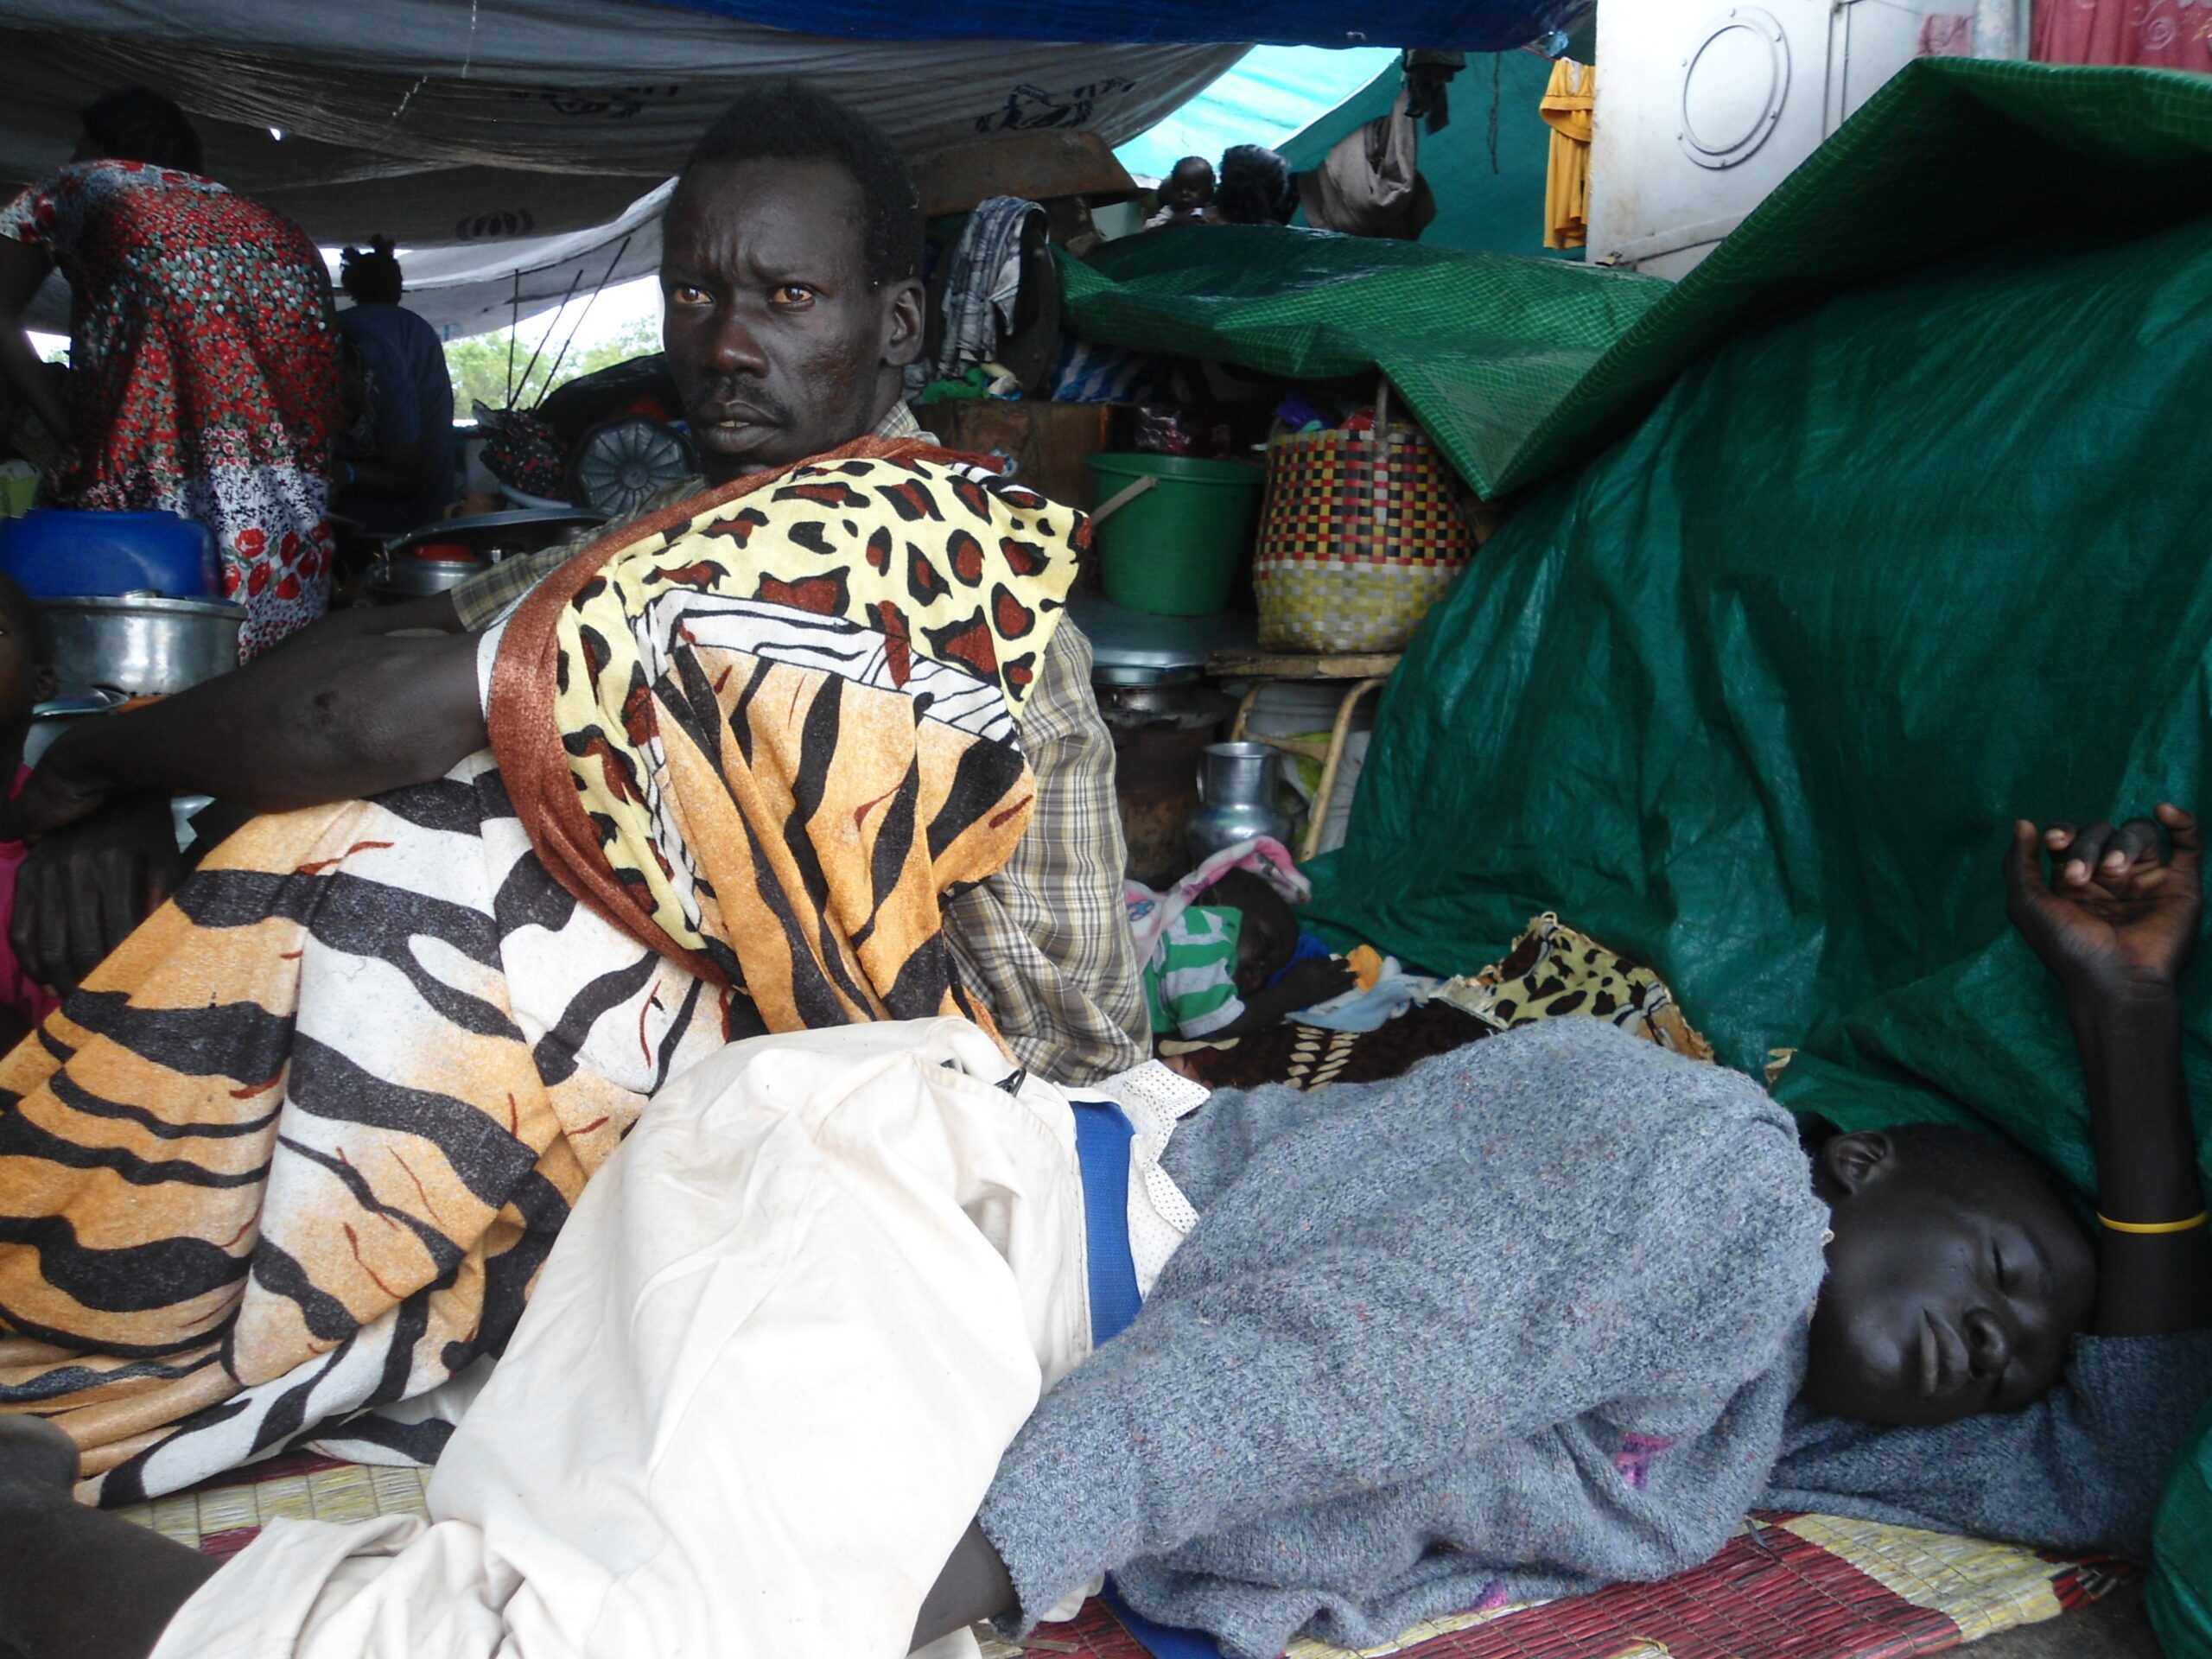 Patients in the crowded ship, Bor docking point, Jonglei, August 22, 2012 (ST)